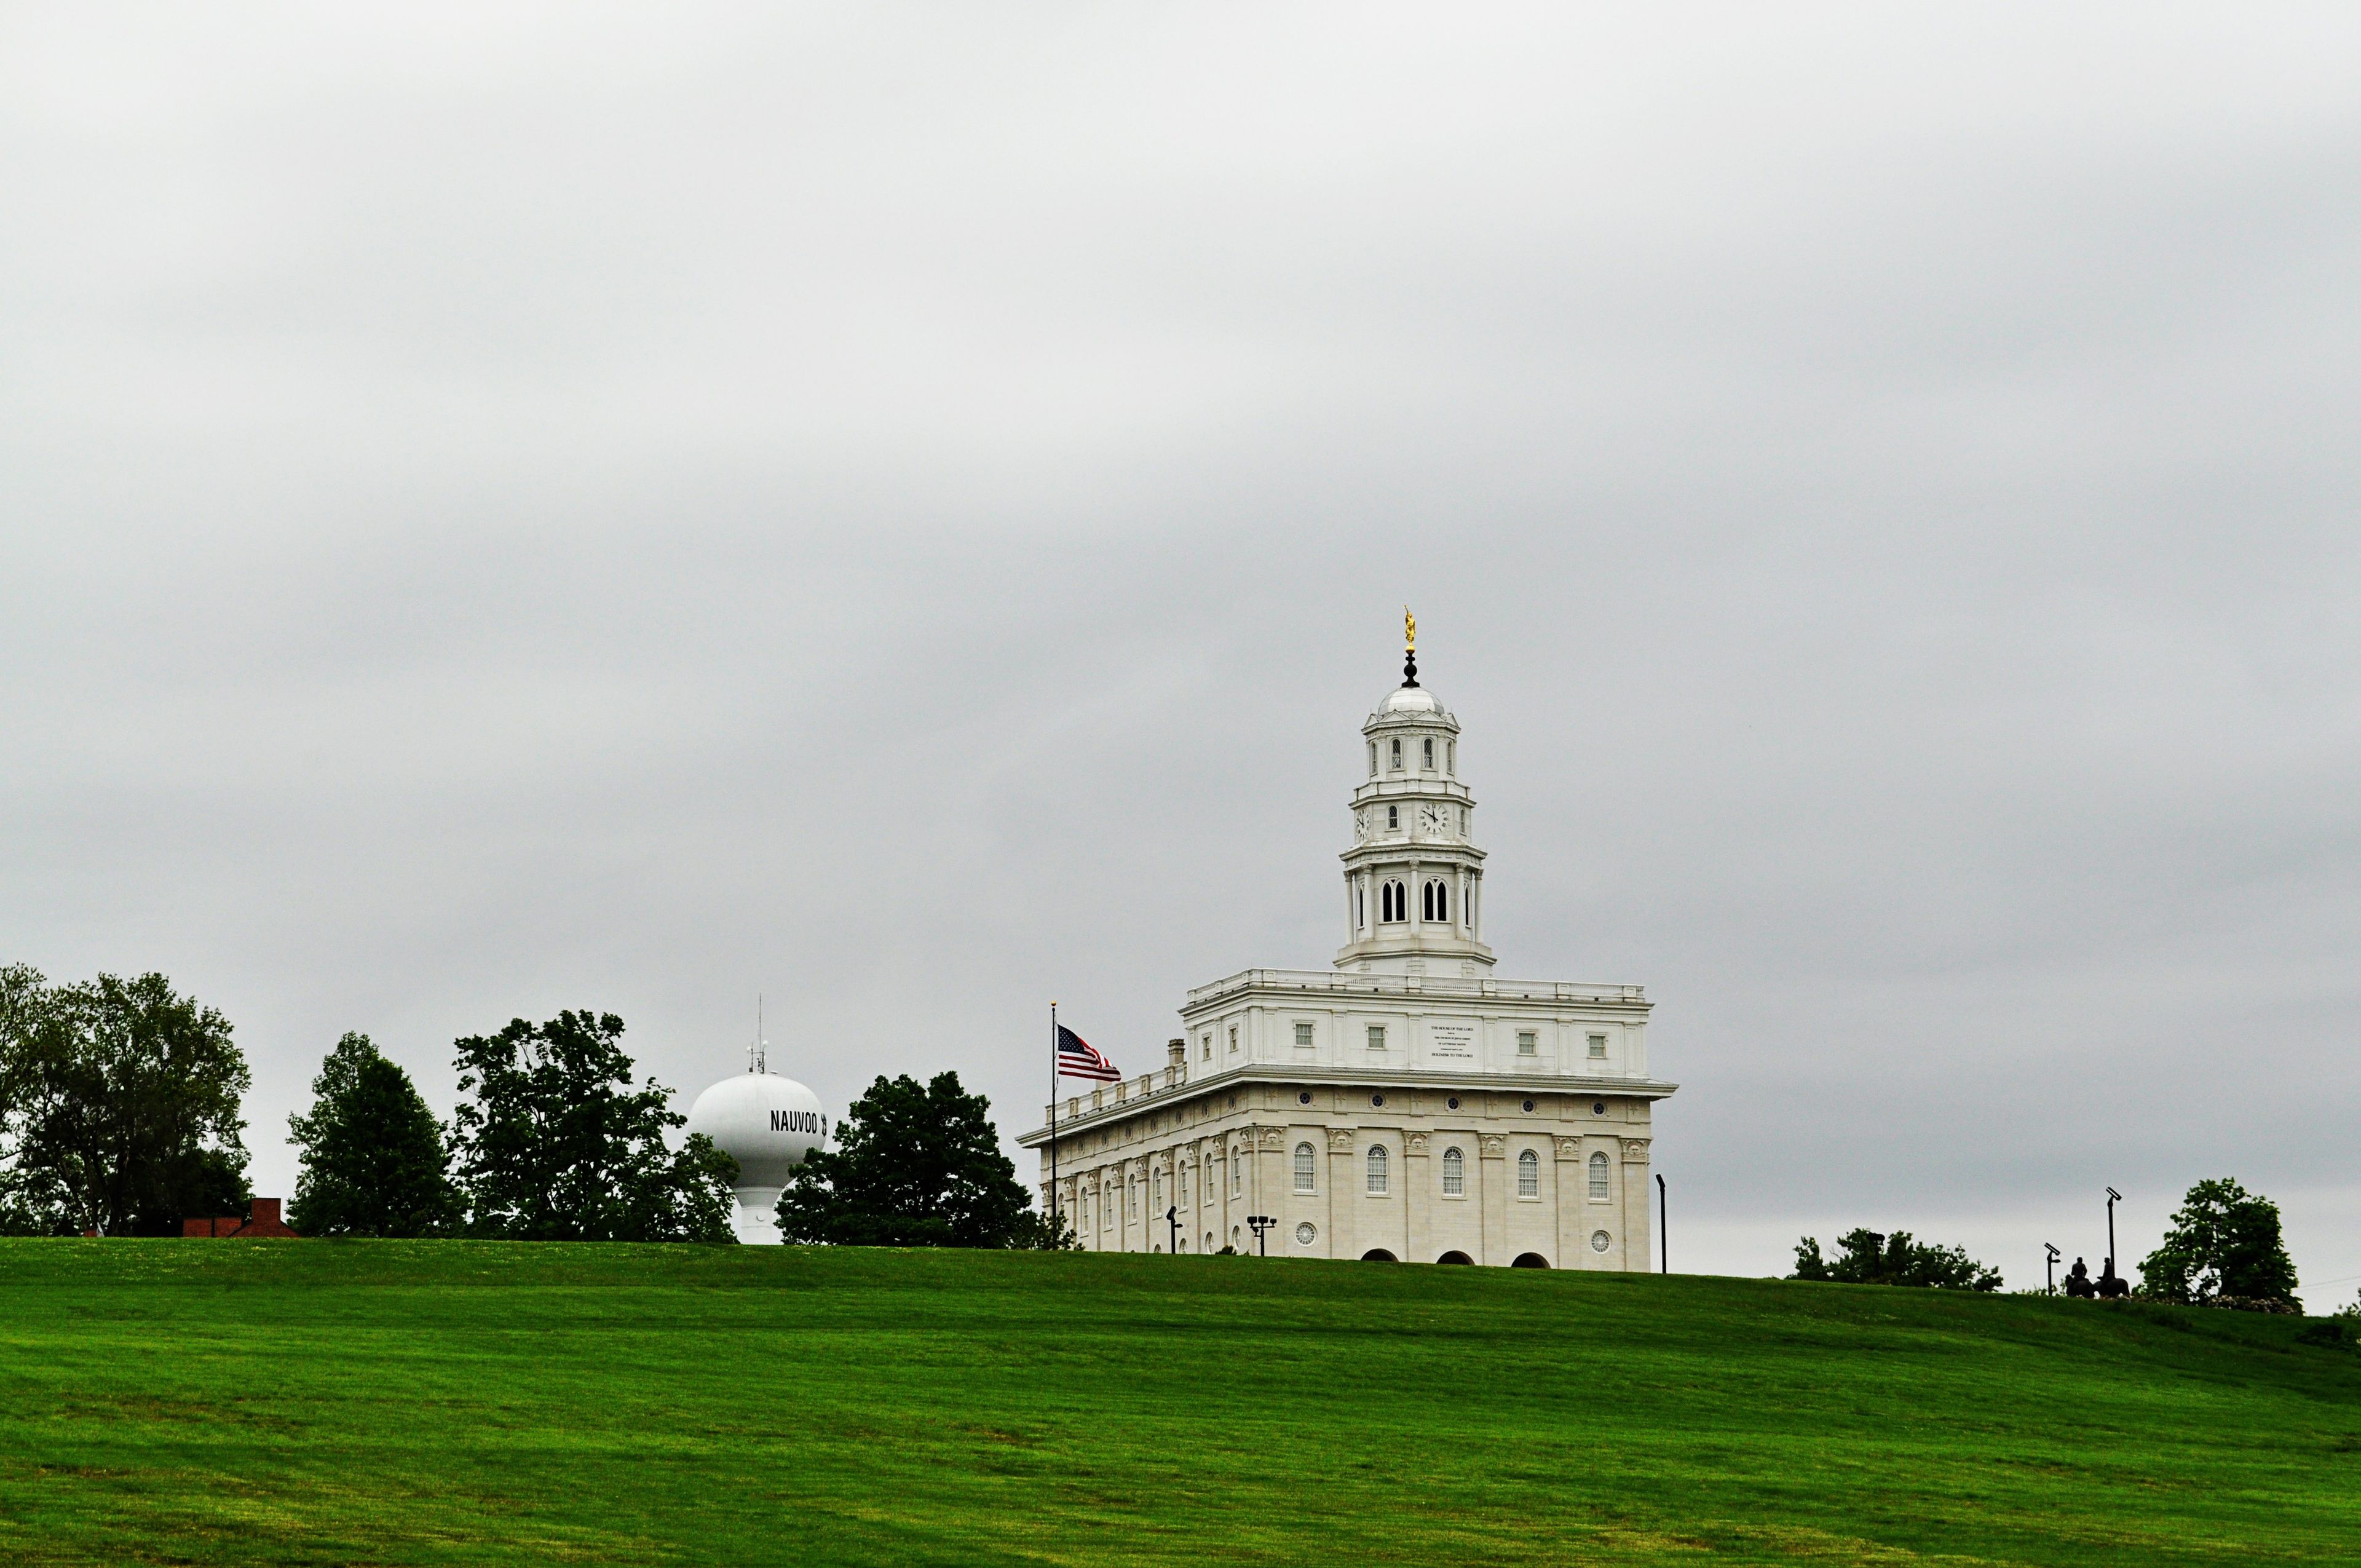 The Nauvoo Illinois Temple, including scenery.